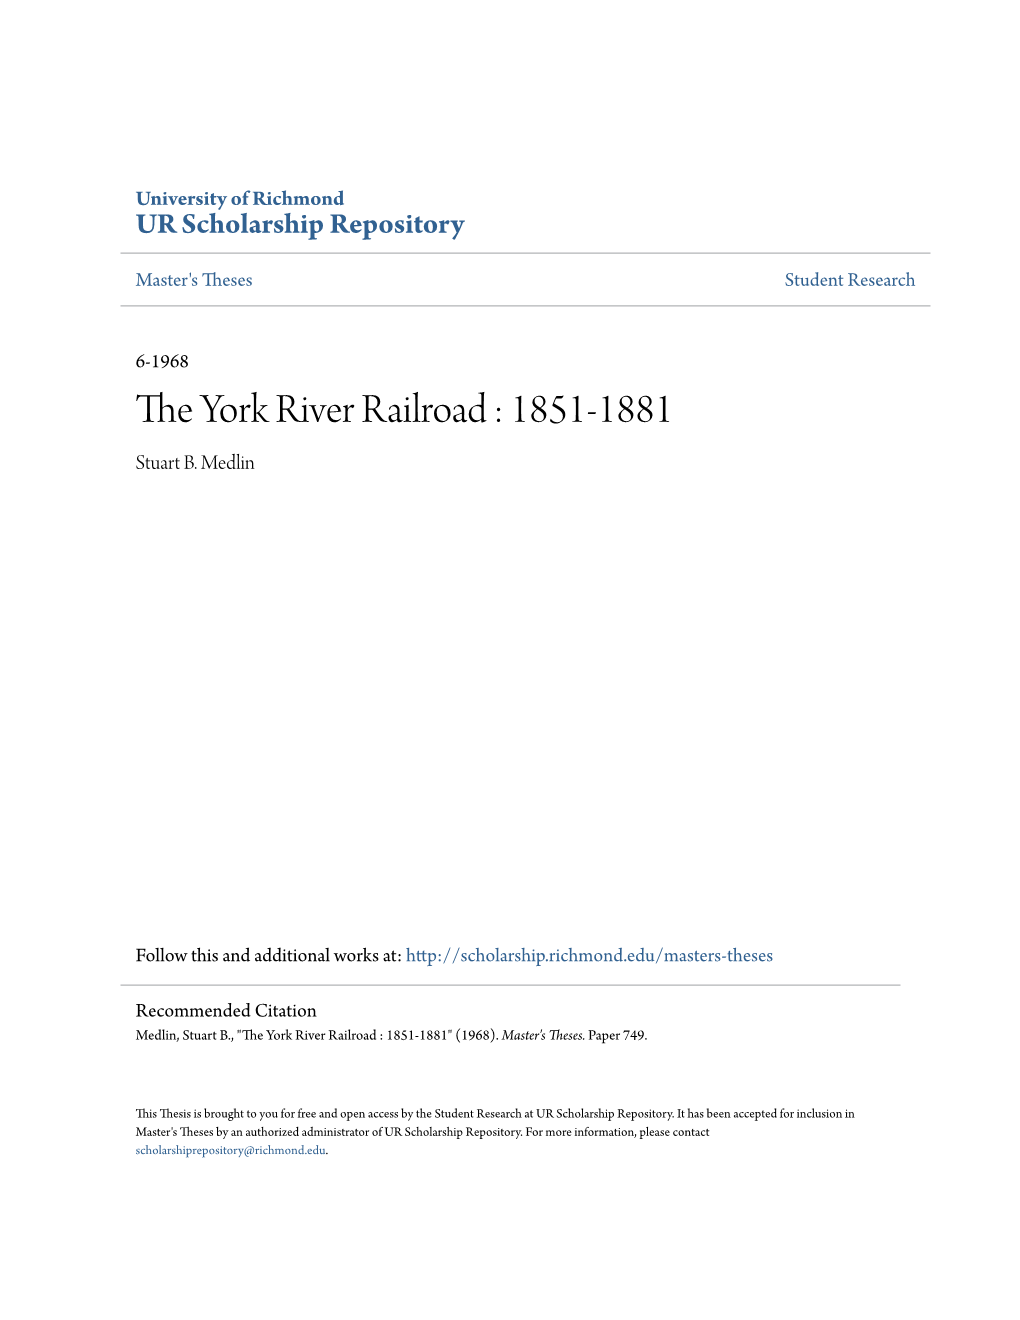 The York River Railroad Waa Developing M~Y Be Asaumed from the Role Two Officials Or the Line Pe~­ .Formed at a Meeting Held in Hiohmond on December A, 1857